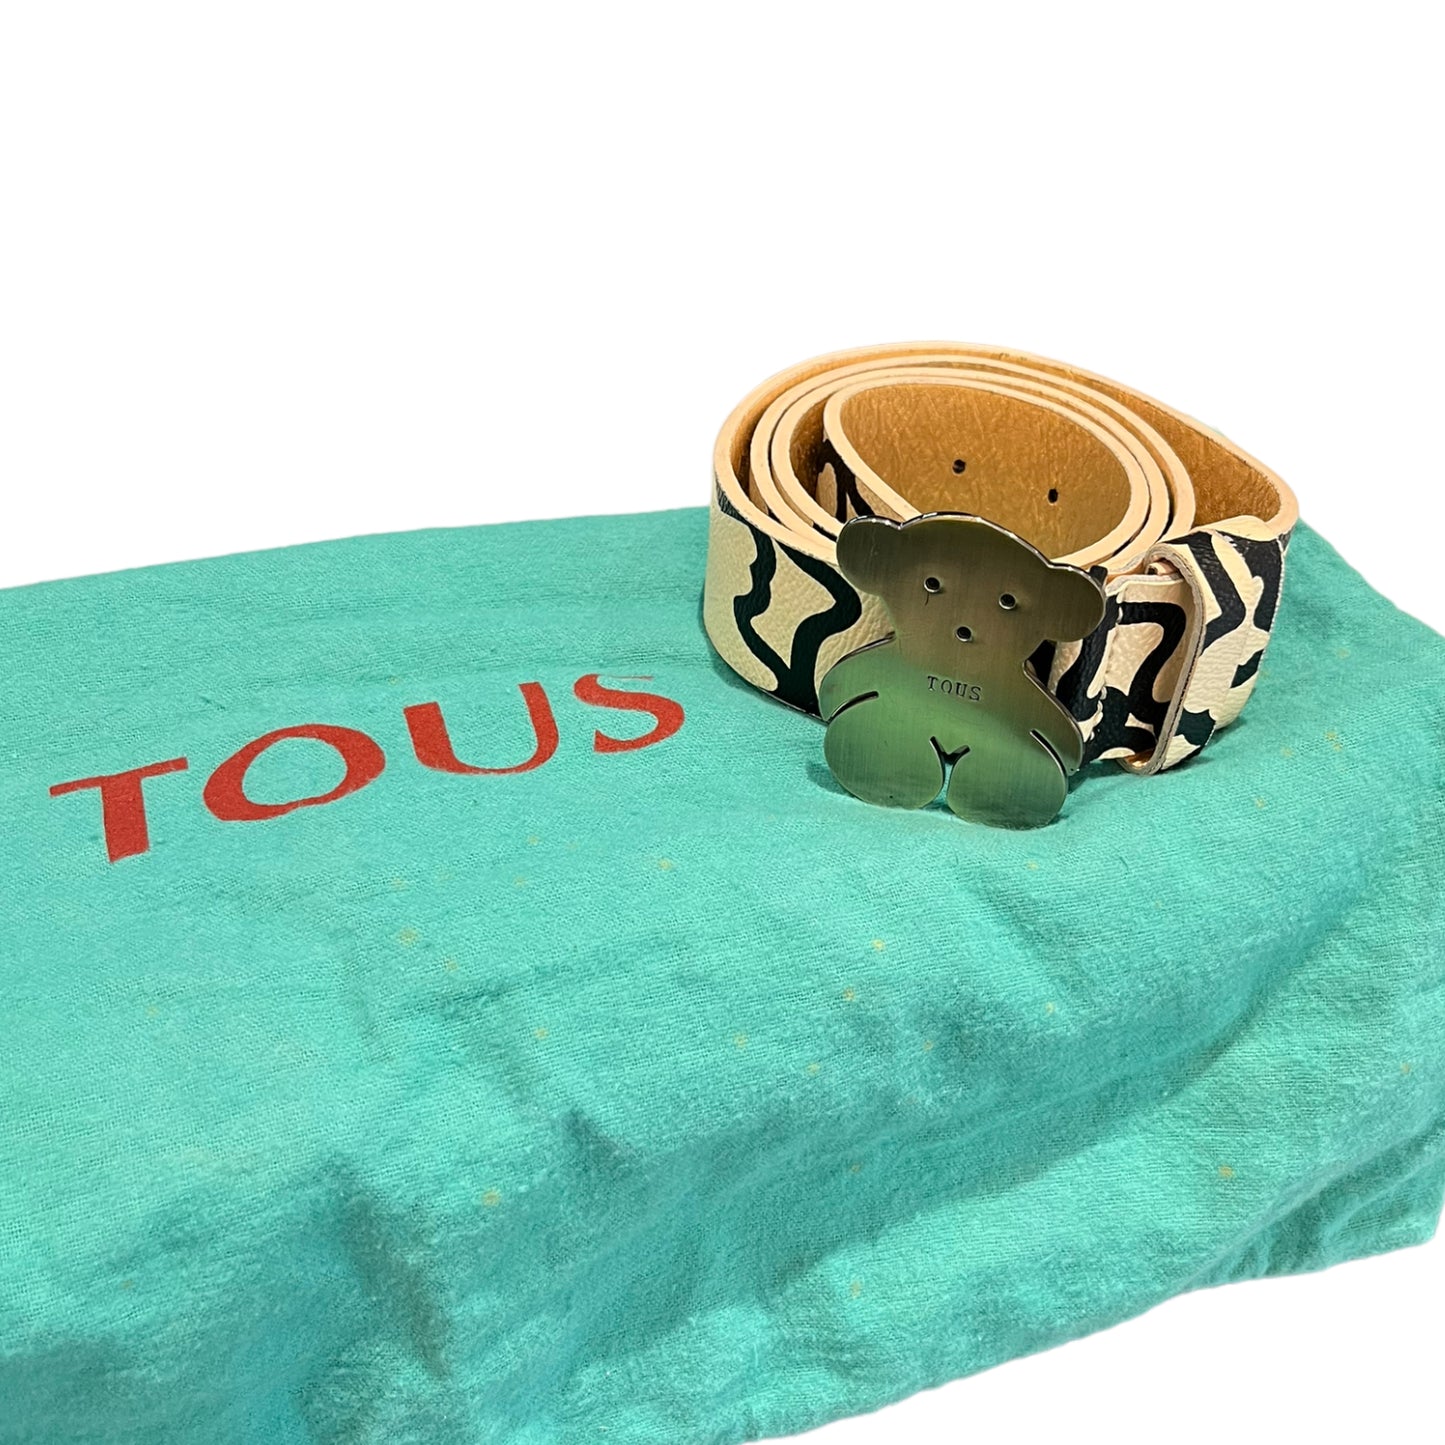 Tous Cream and Black Leather Belt